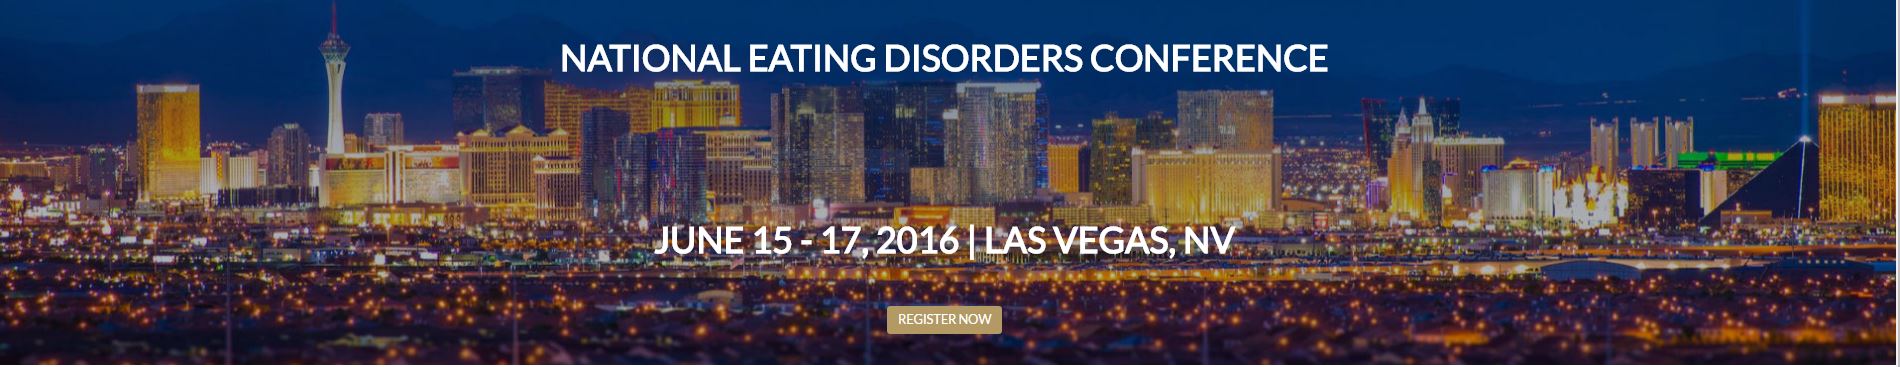 National Eating Disorder Conference